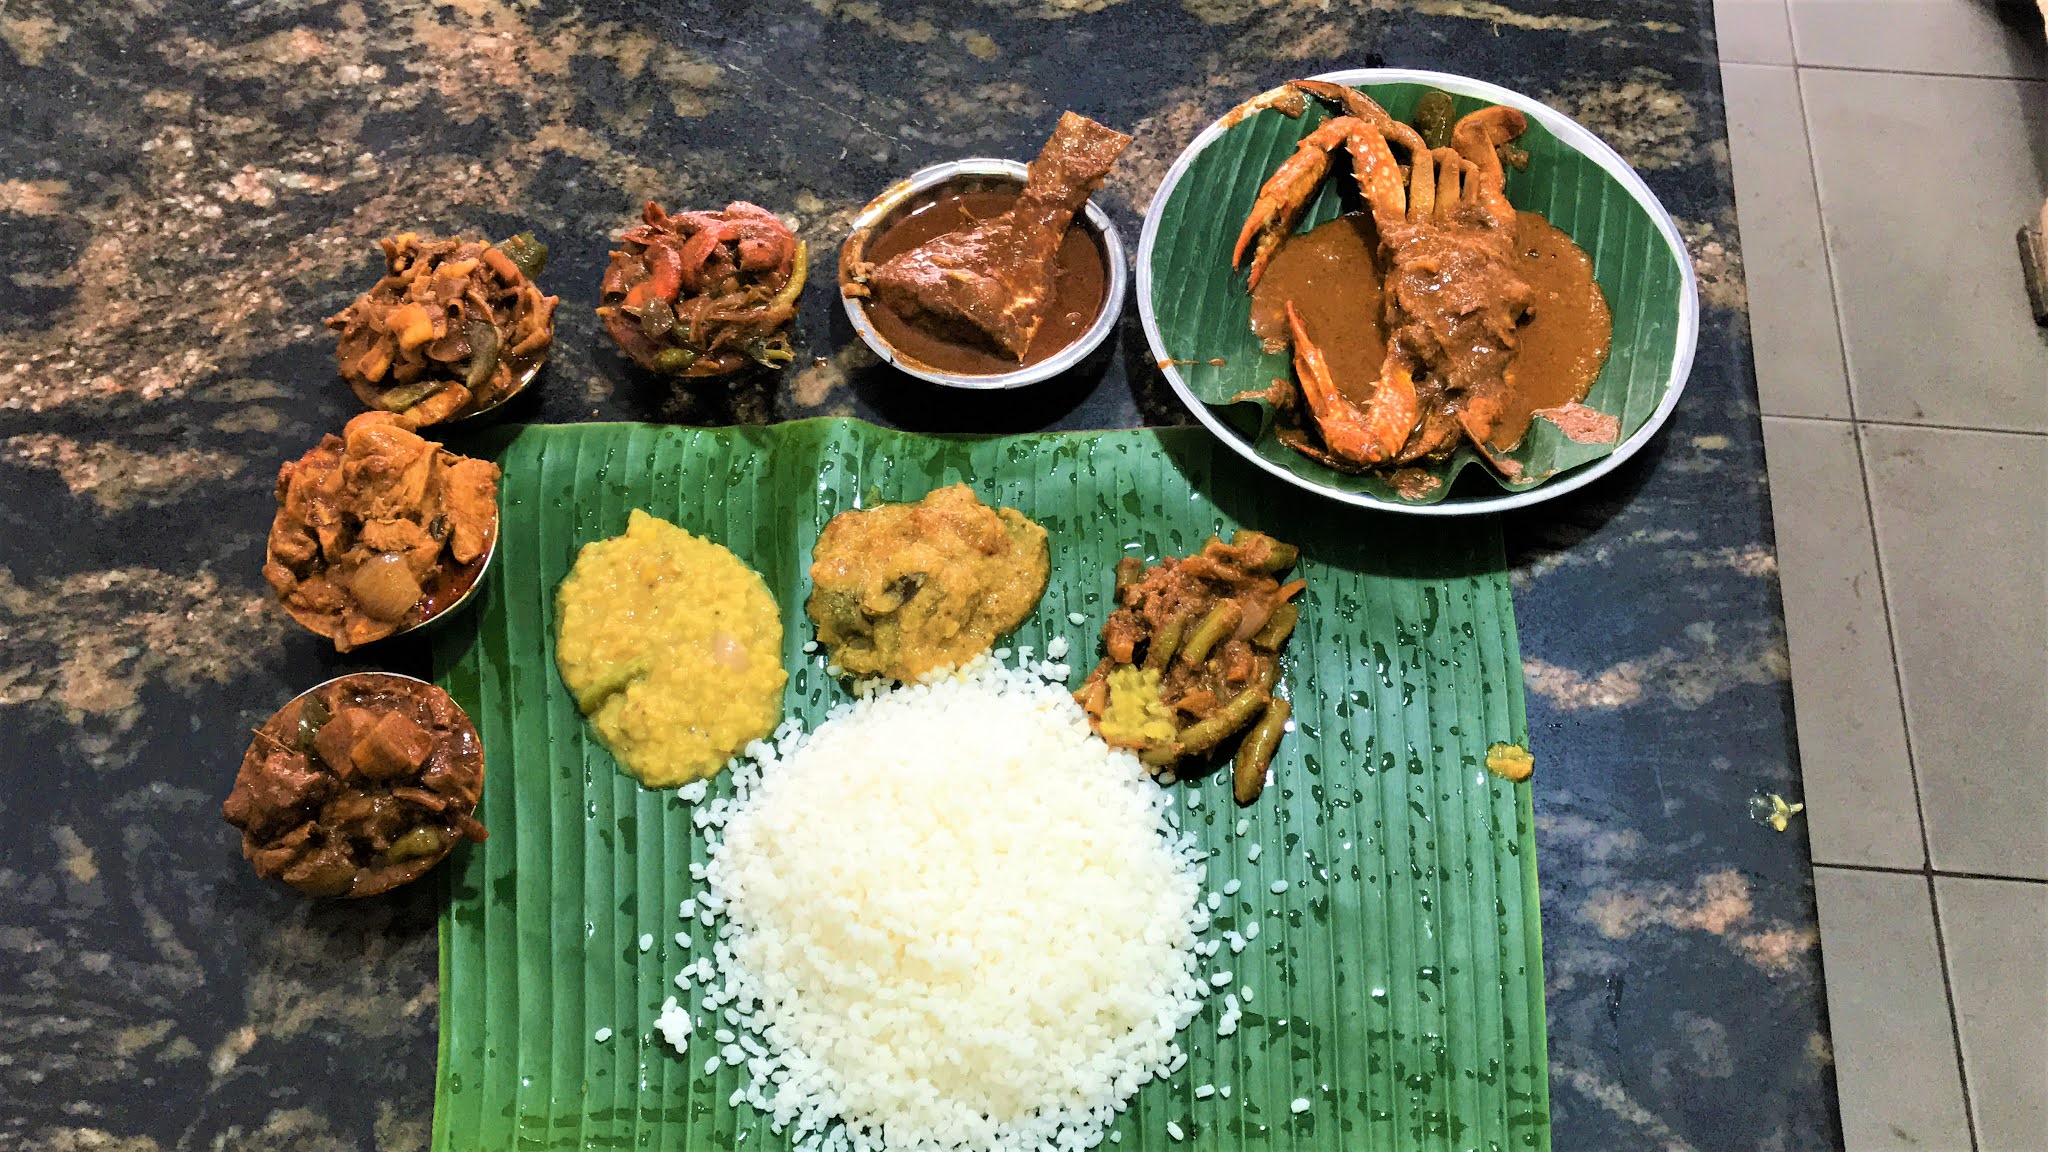 Tamil Style Non-Veg Lunch At Colombo - New Murugan Cafe